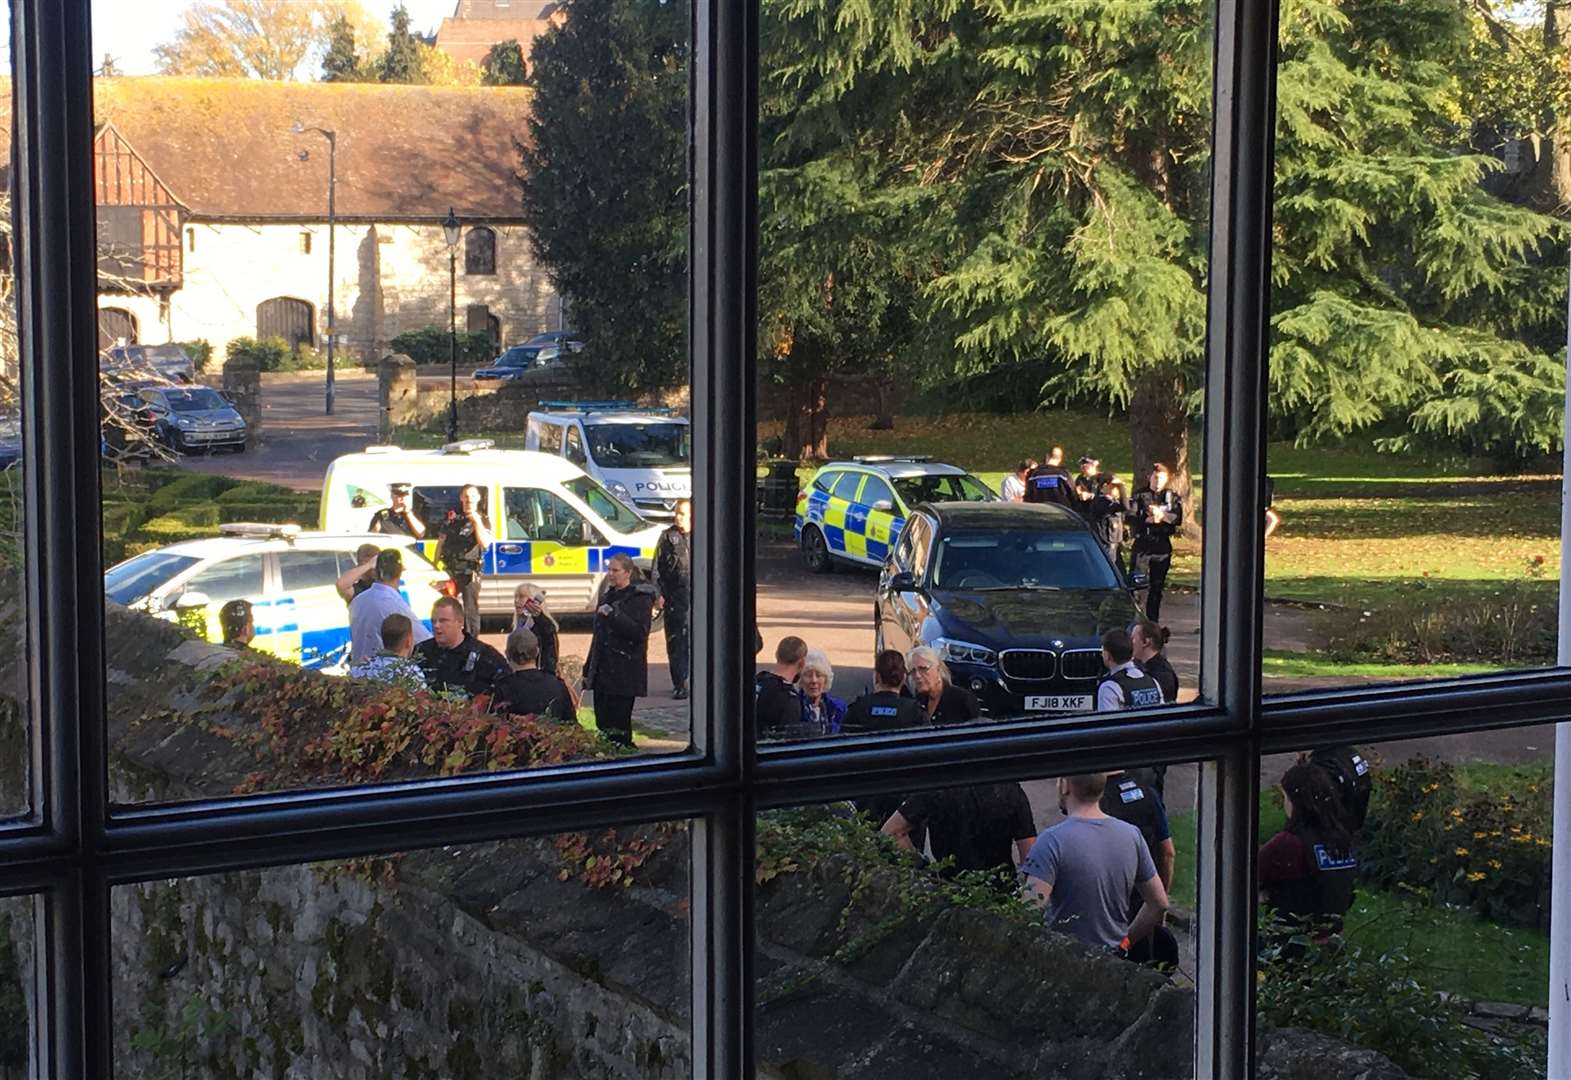 Police swarm the Archbishops Palace in Maidstone